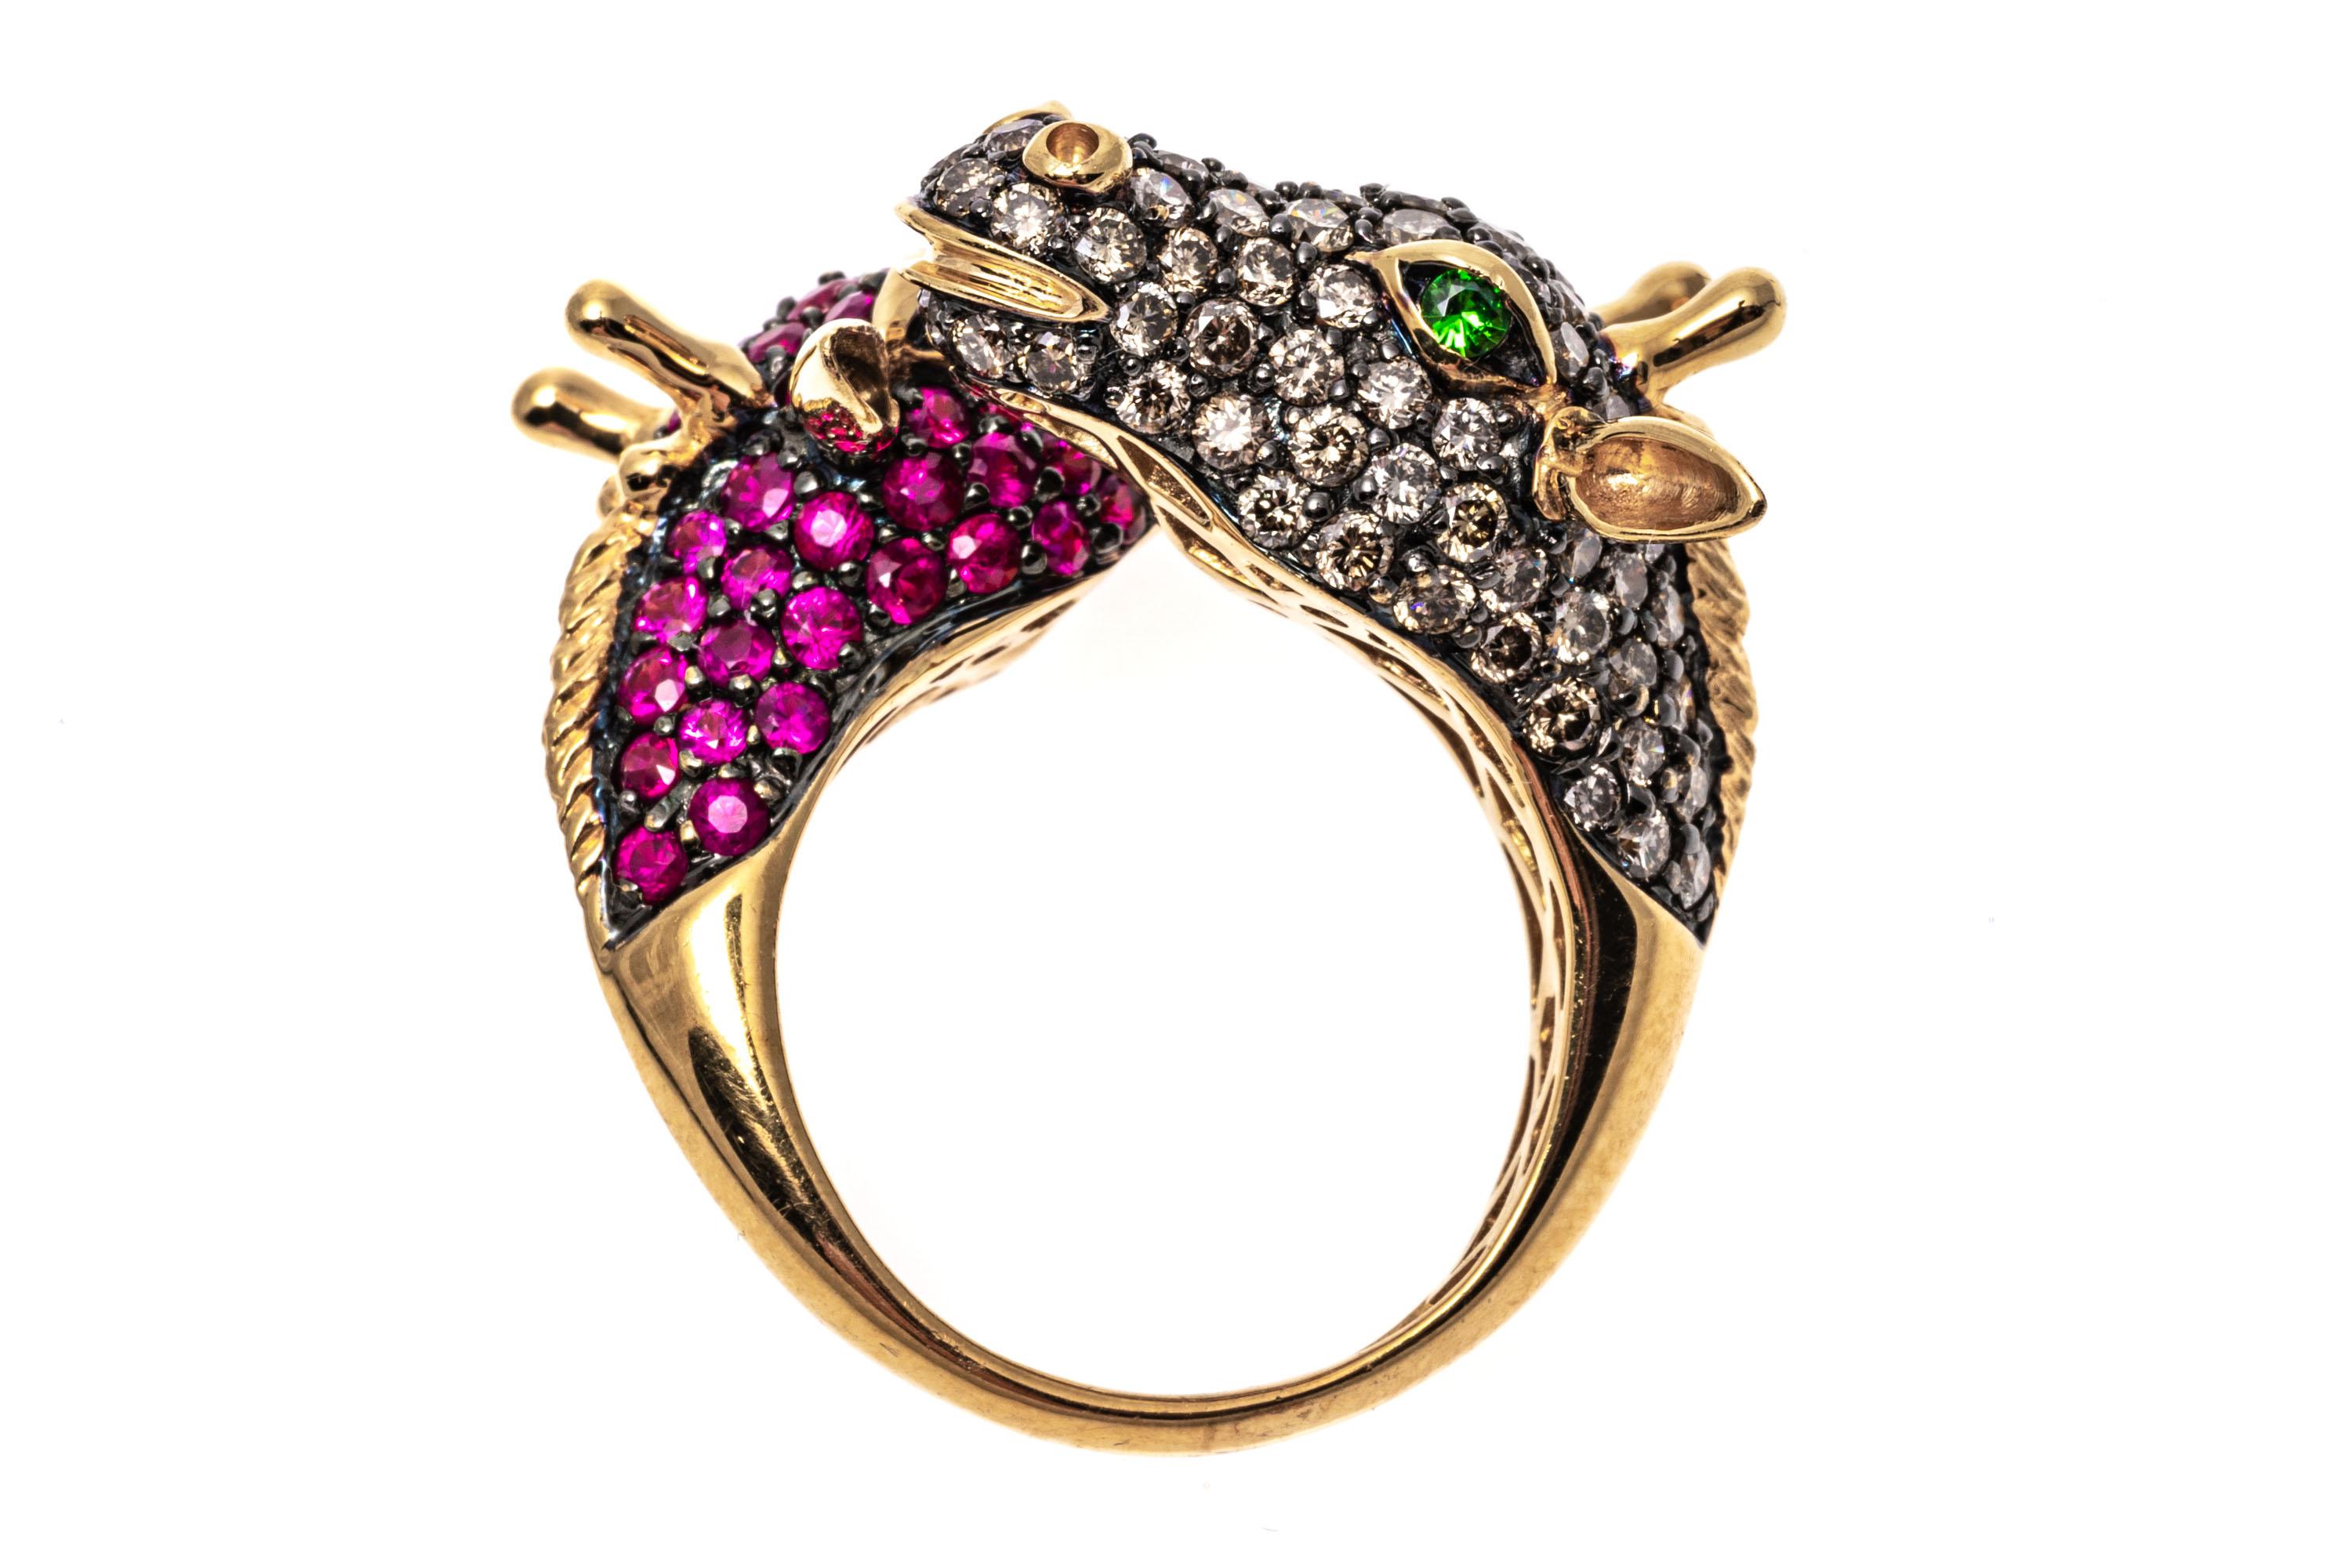 18k Gold Pave Set Cognac Diamond and Pink Sapphire Bypass Giraffes Ring For Sale 6